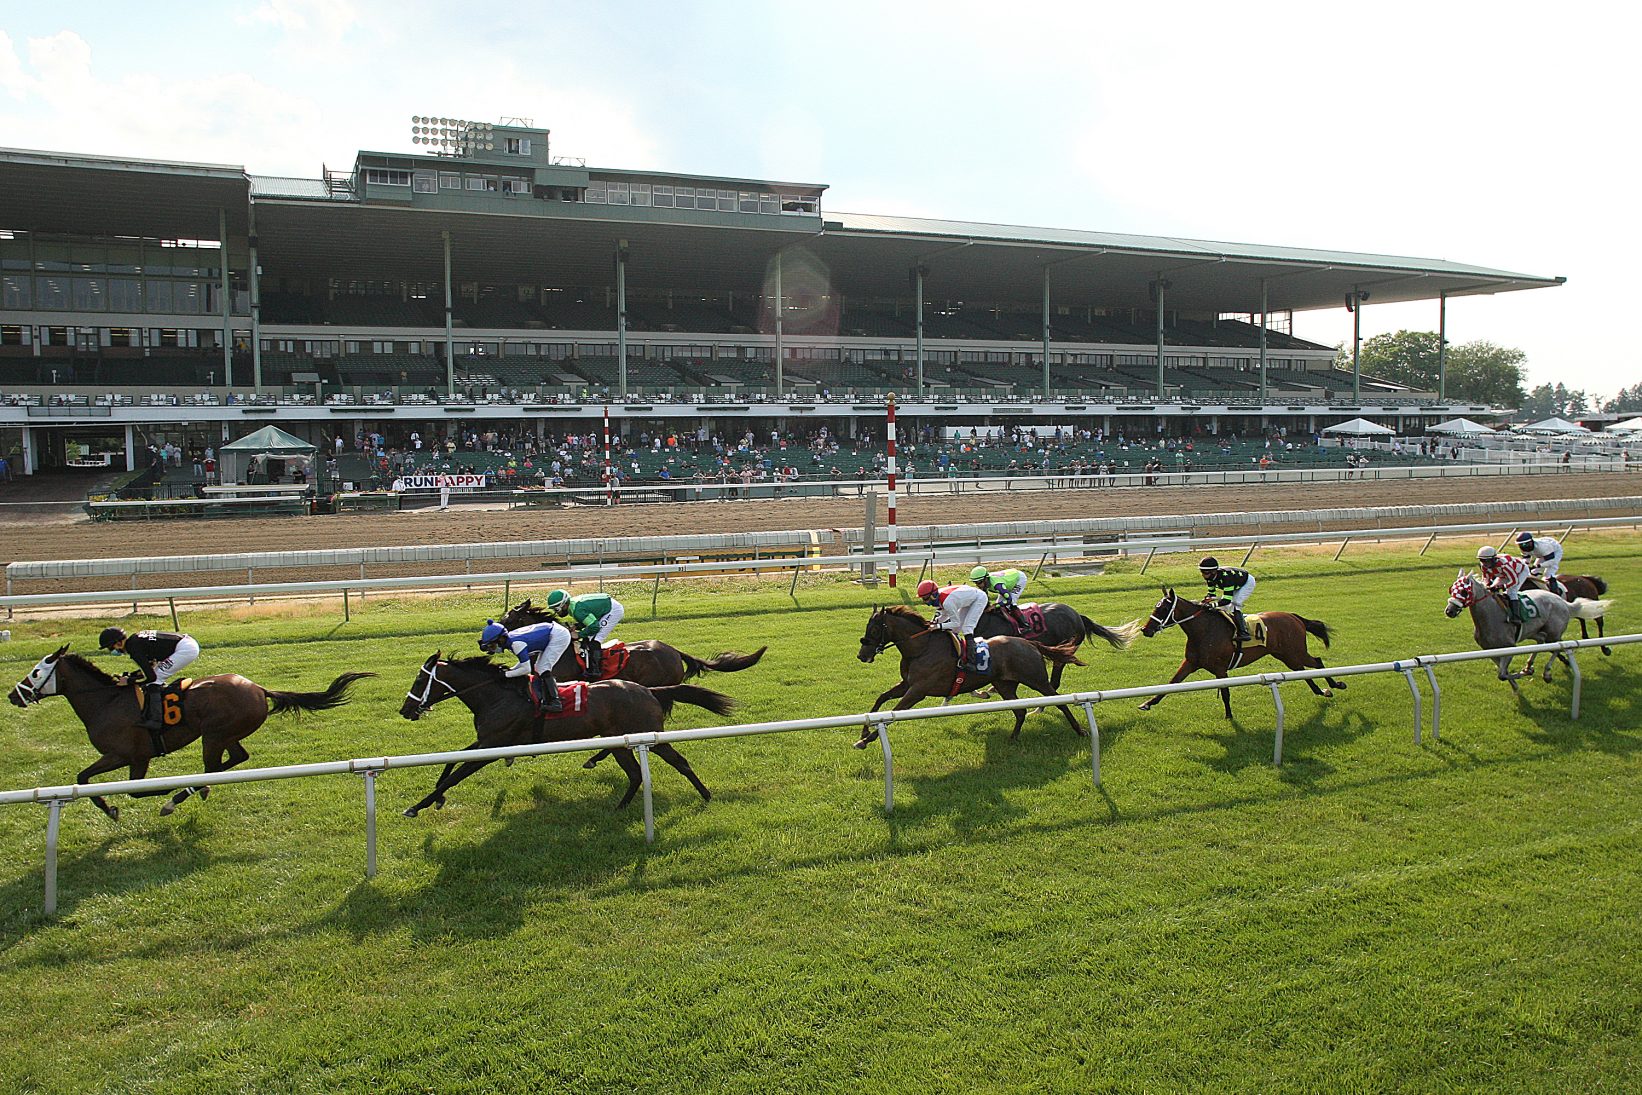 Opening Day of horse racing at Monmouth Park